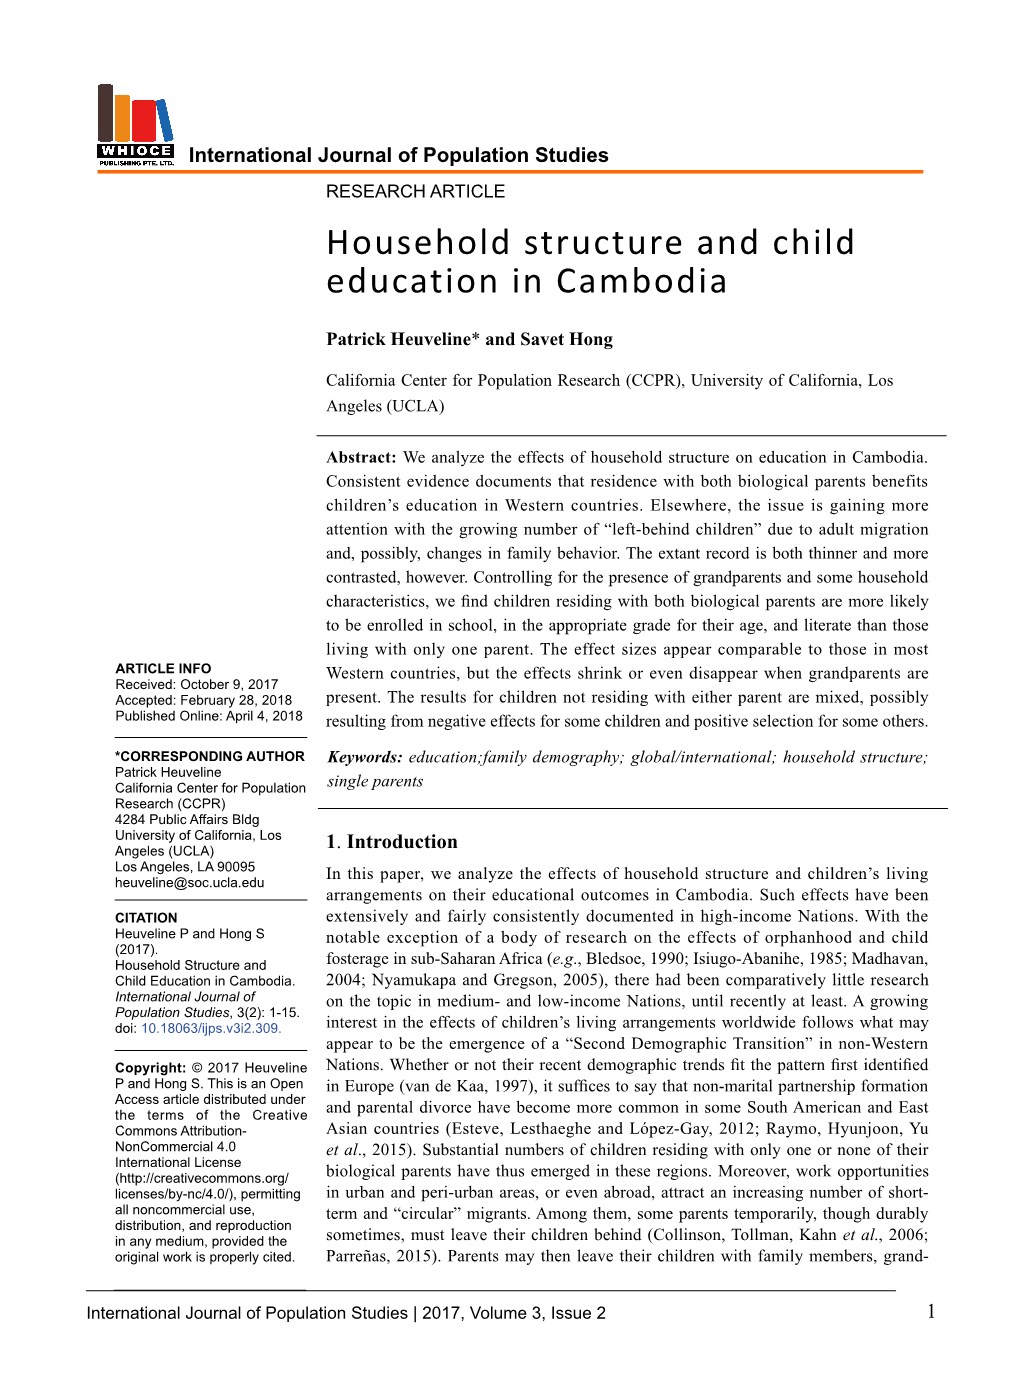 Household Structure and Child Education in Cambodia